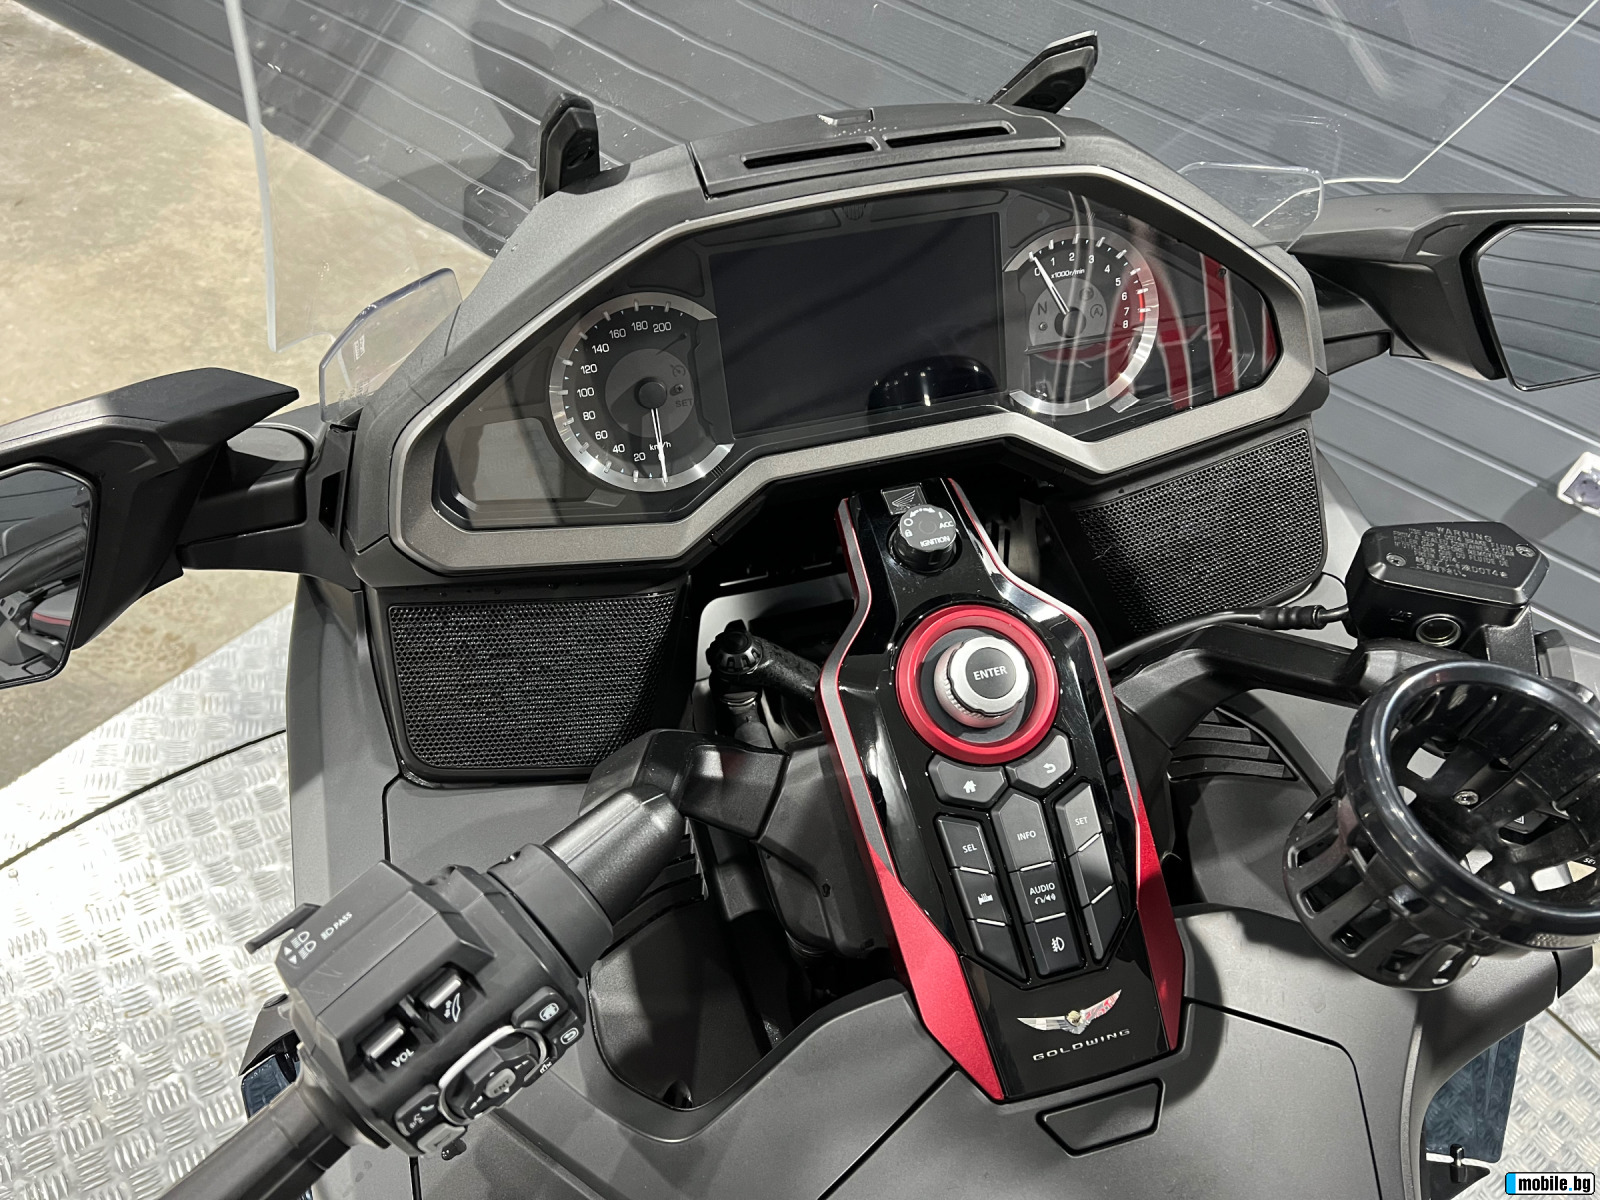 Honda Gold Wing DCT 2020 LIMITED EDITION | Mobile.bg   9